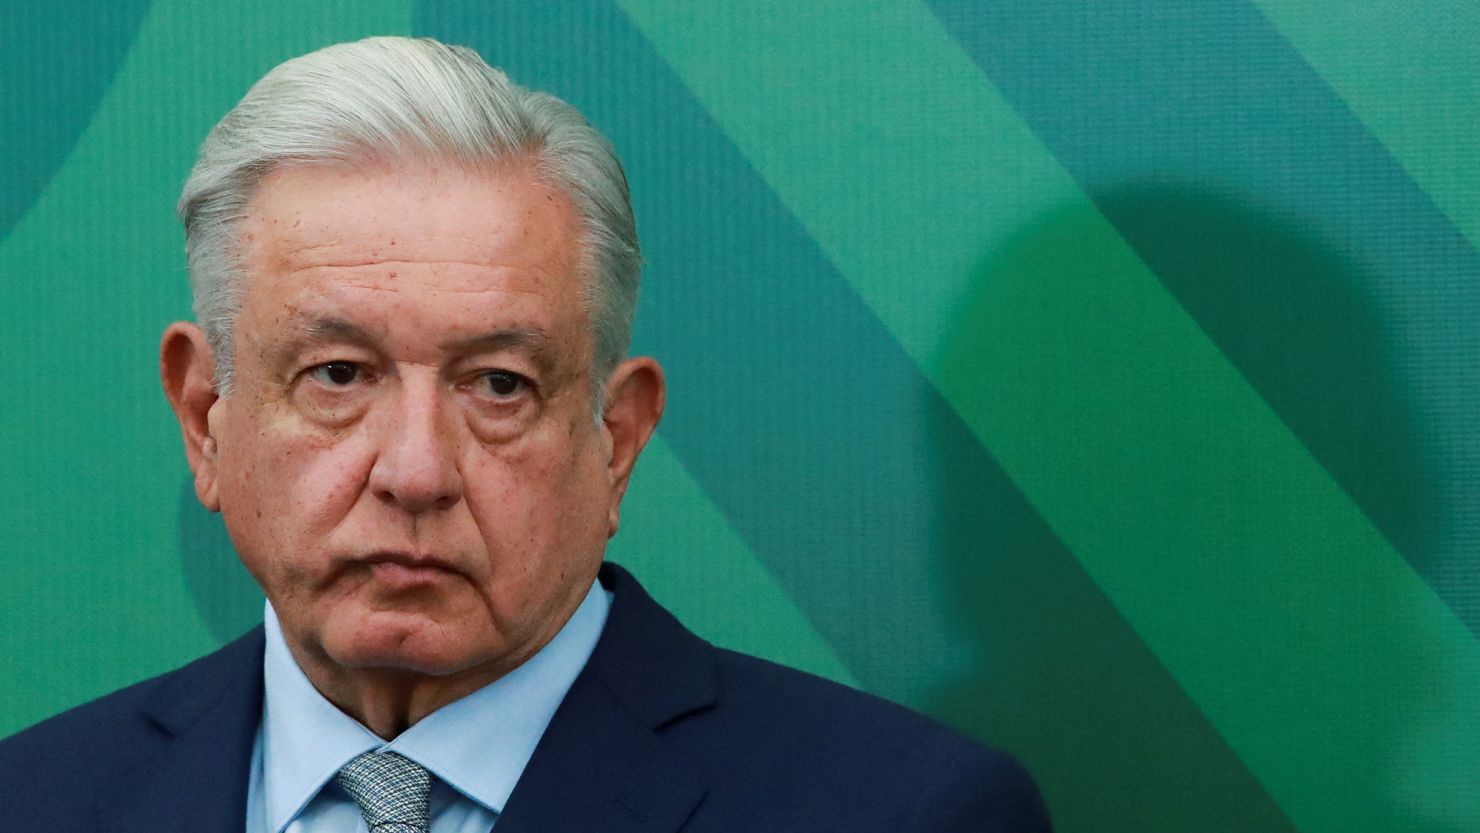 Mexico's president says Mexico is safer than the US